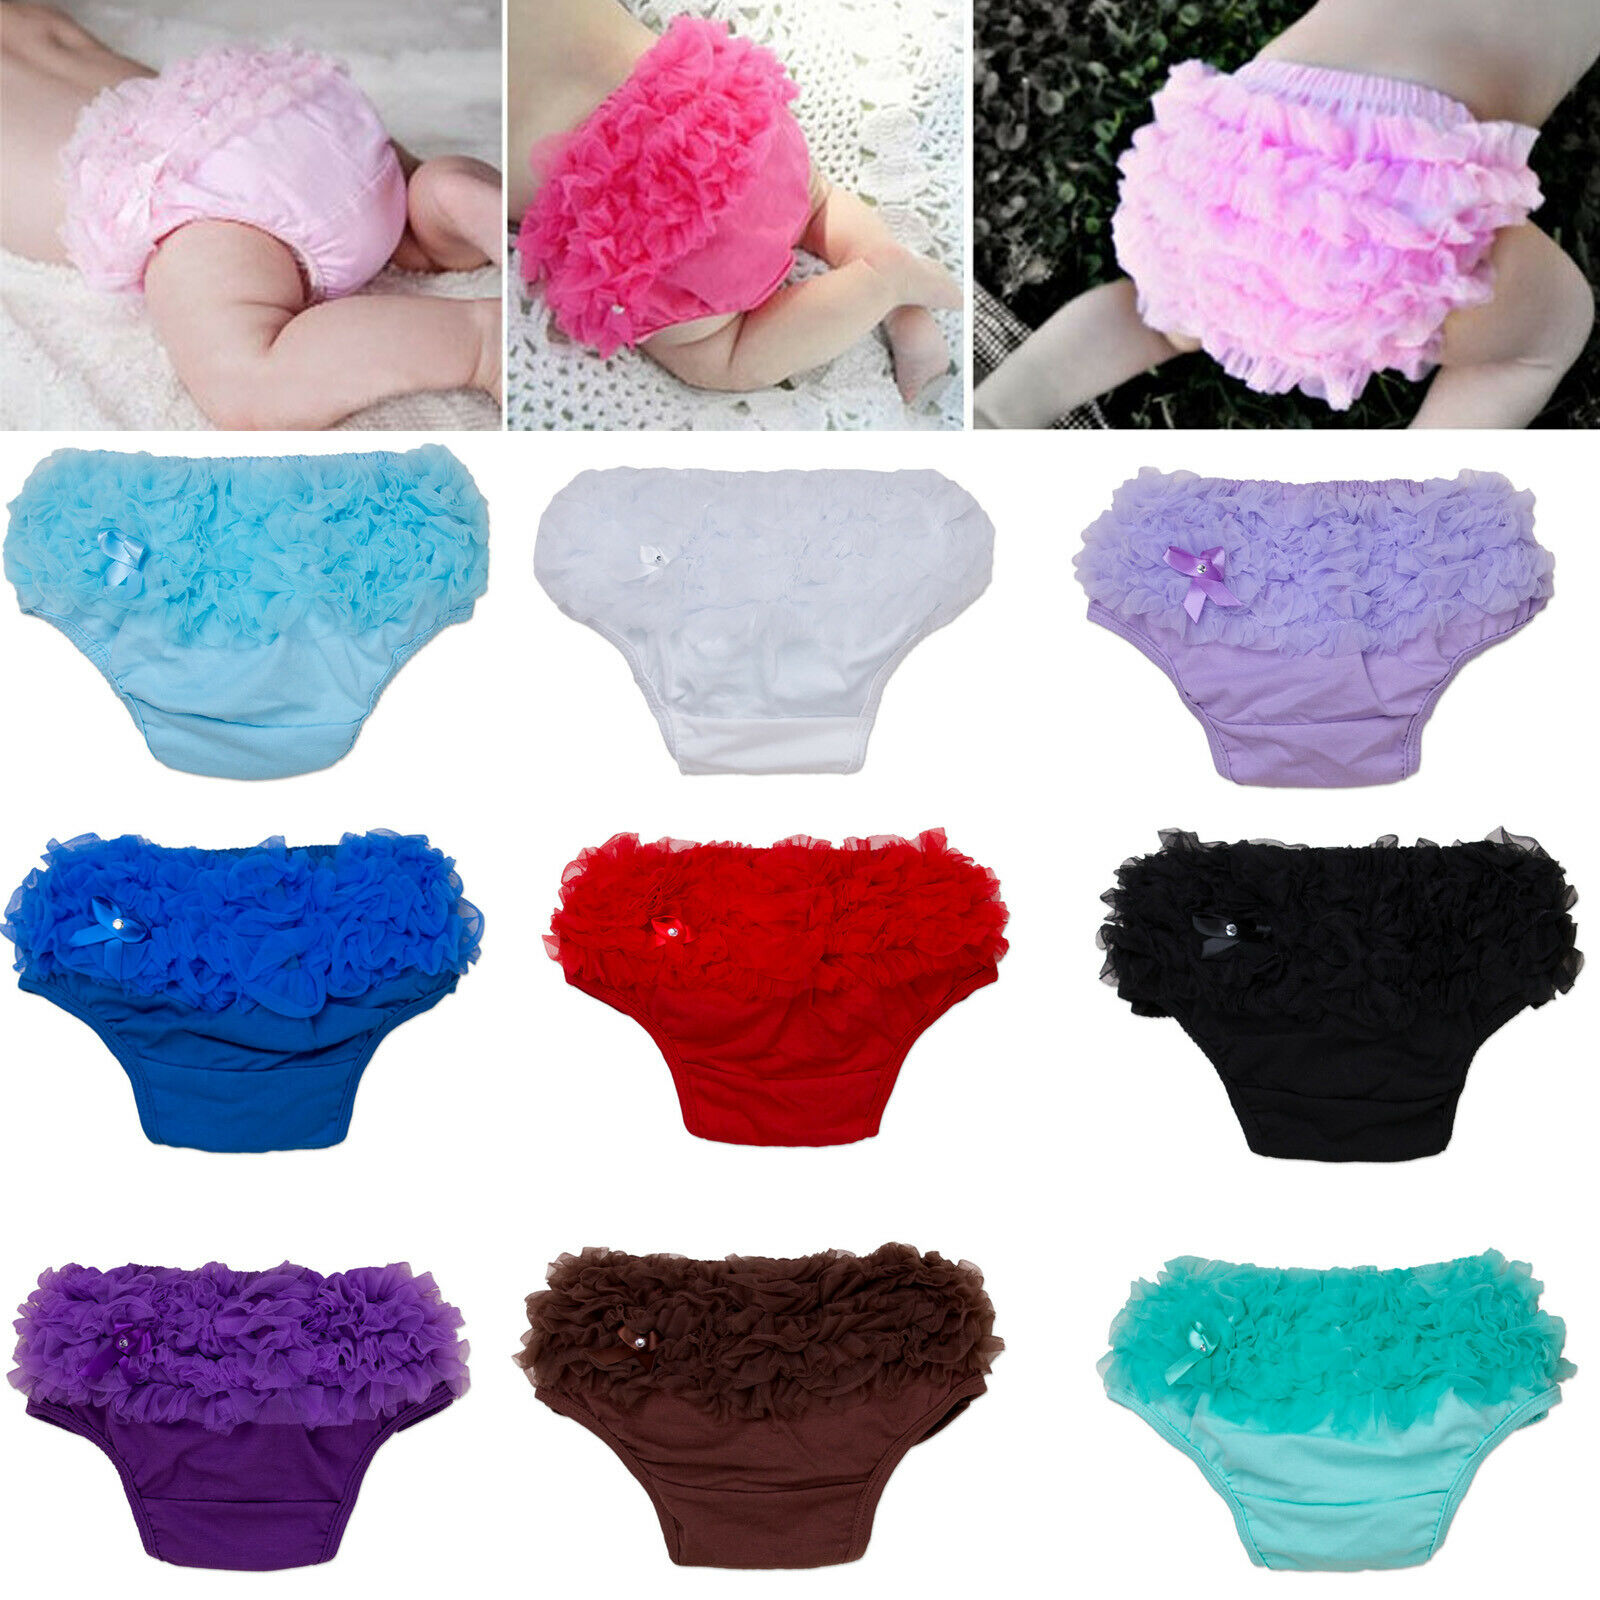 Baby Girls Frilly Bloomers Cotton Nappy Cover Knickers Pants